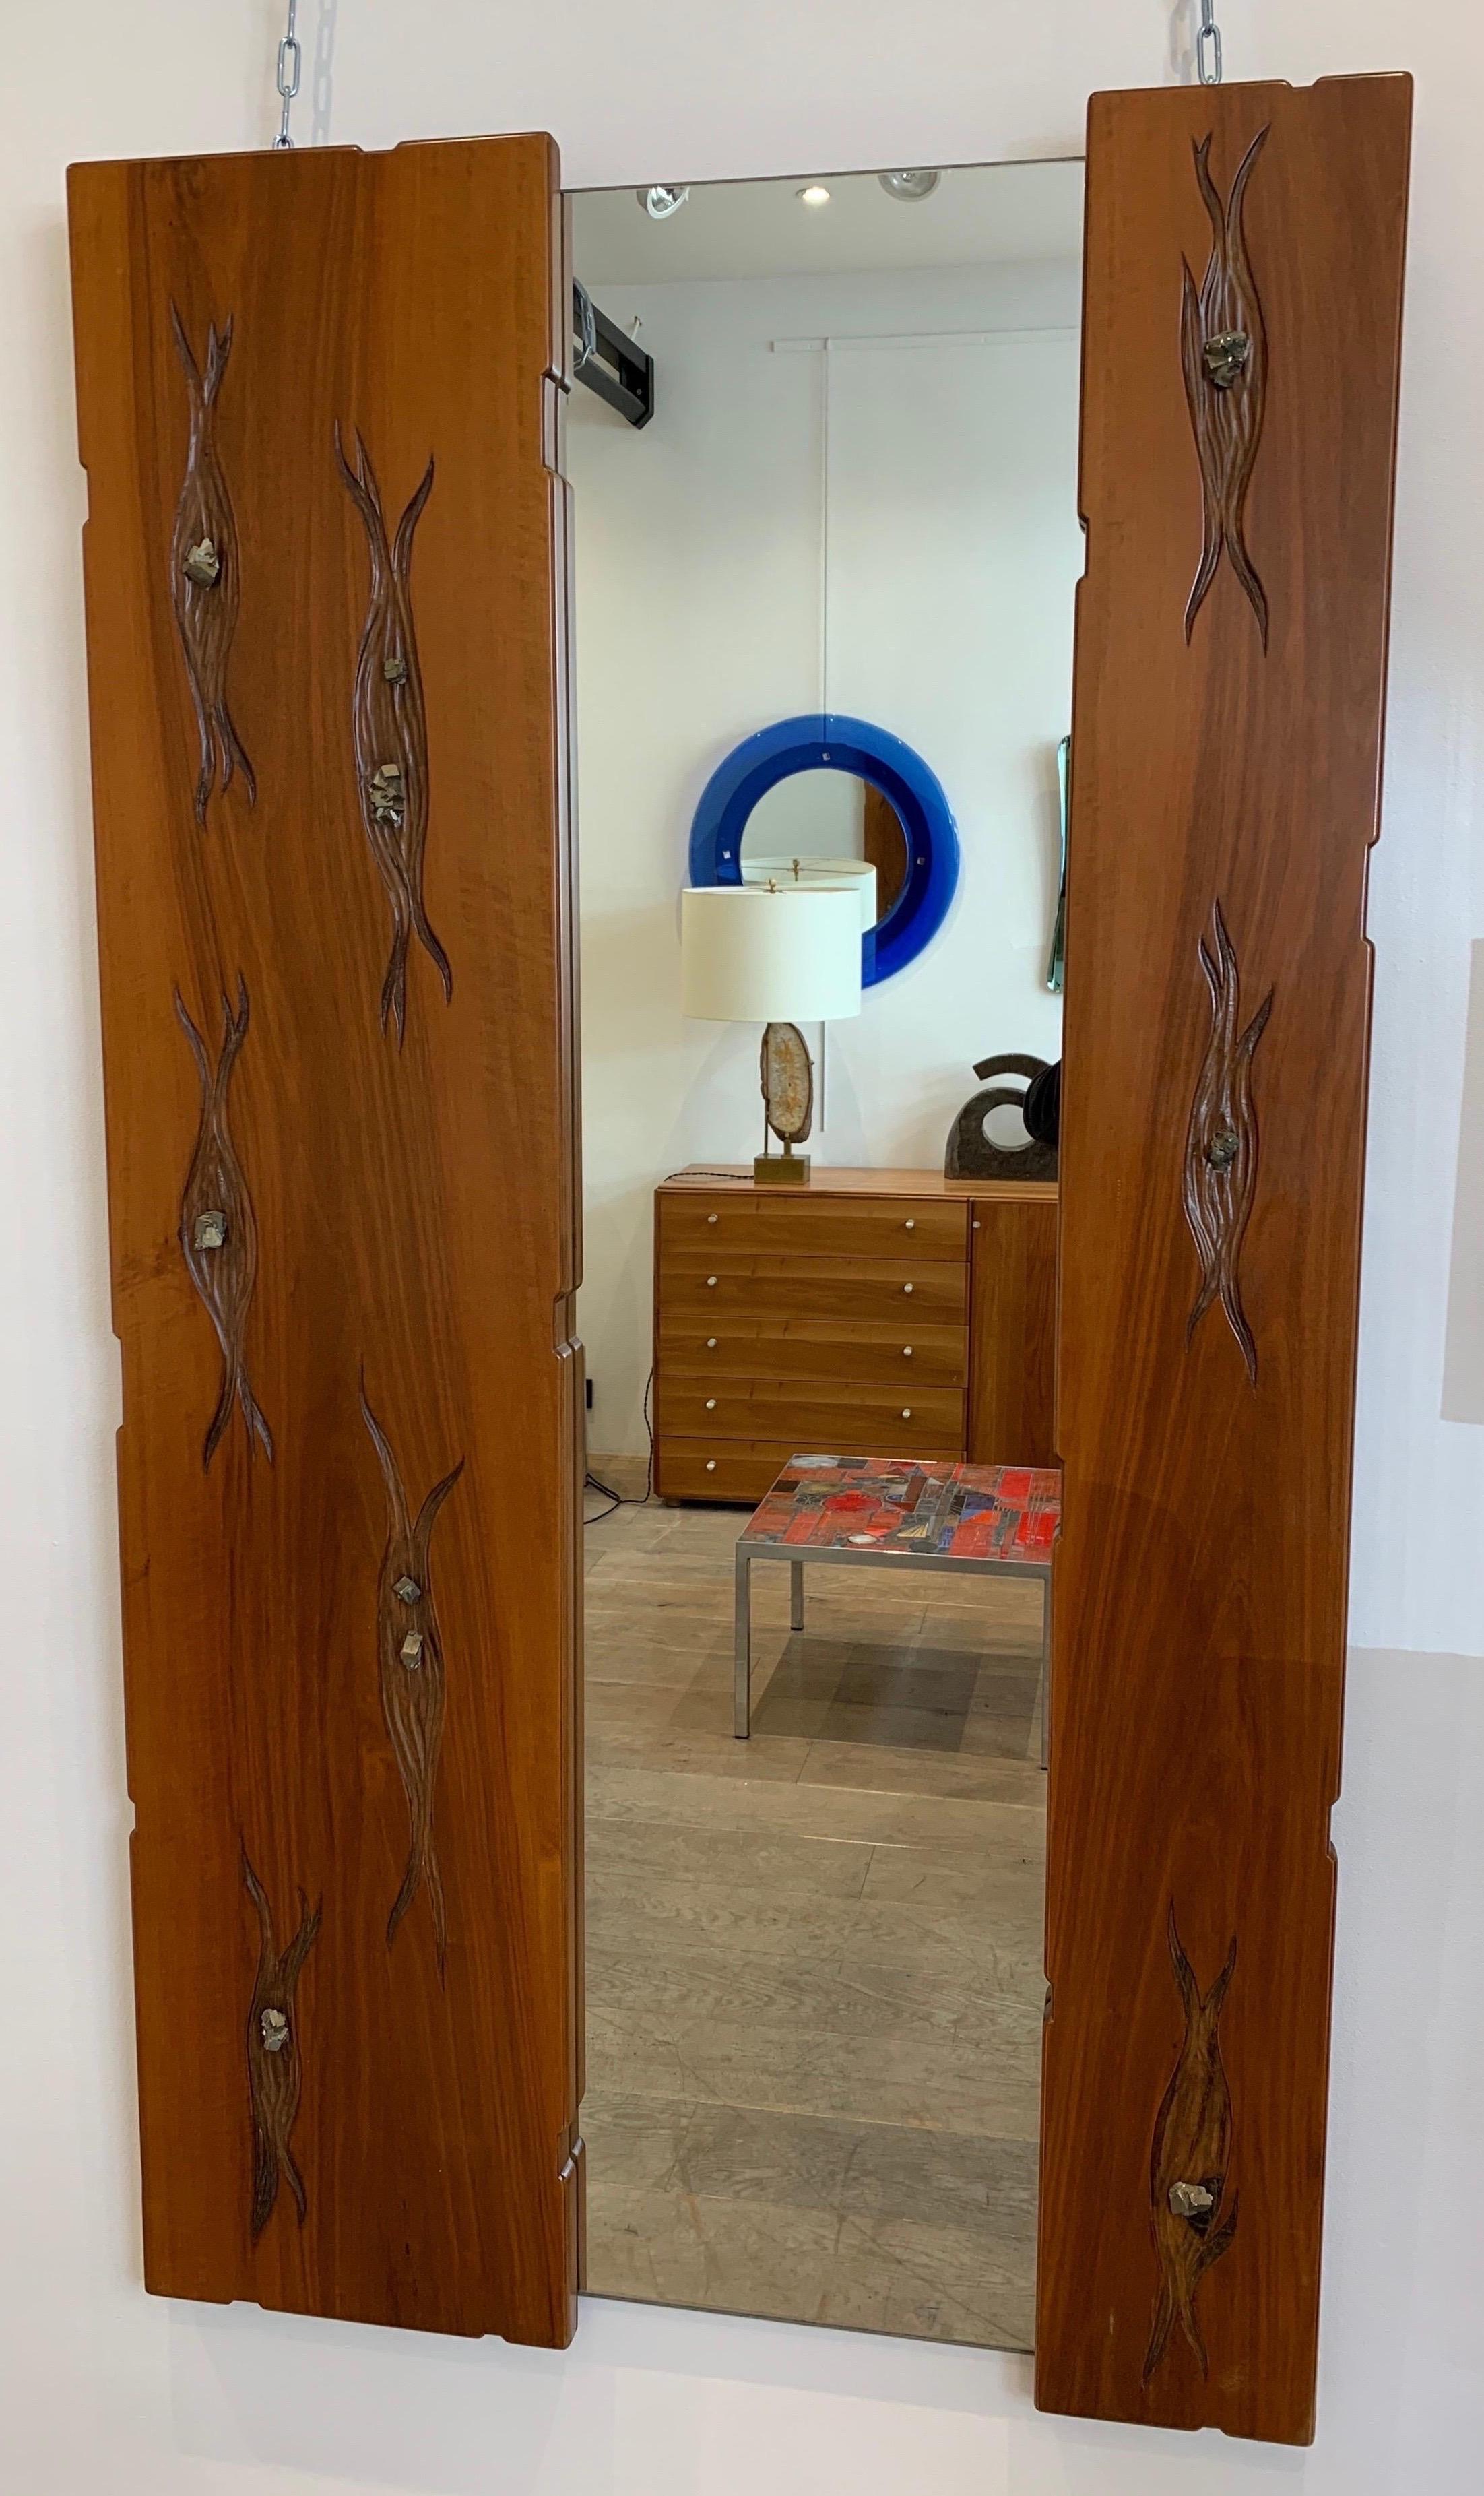 The mirror was executed by the Italian Designer Luca Roncalli, probably in the late 1960s early 1970s. The piece is made of solid walnut that was hand carved with abstract pattern into which Pyrite stones are set.
The mirror is full length. It